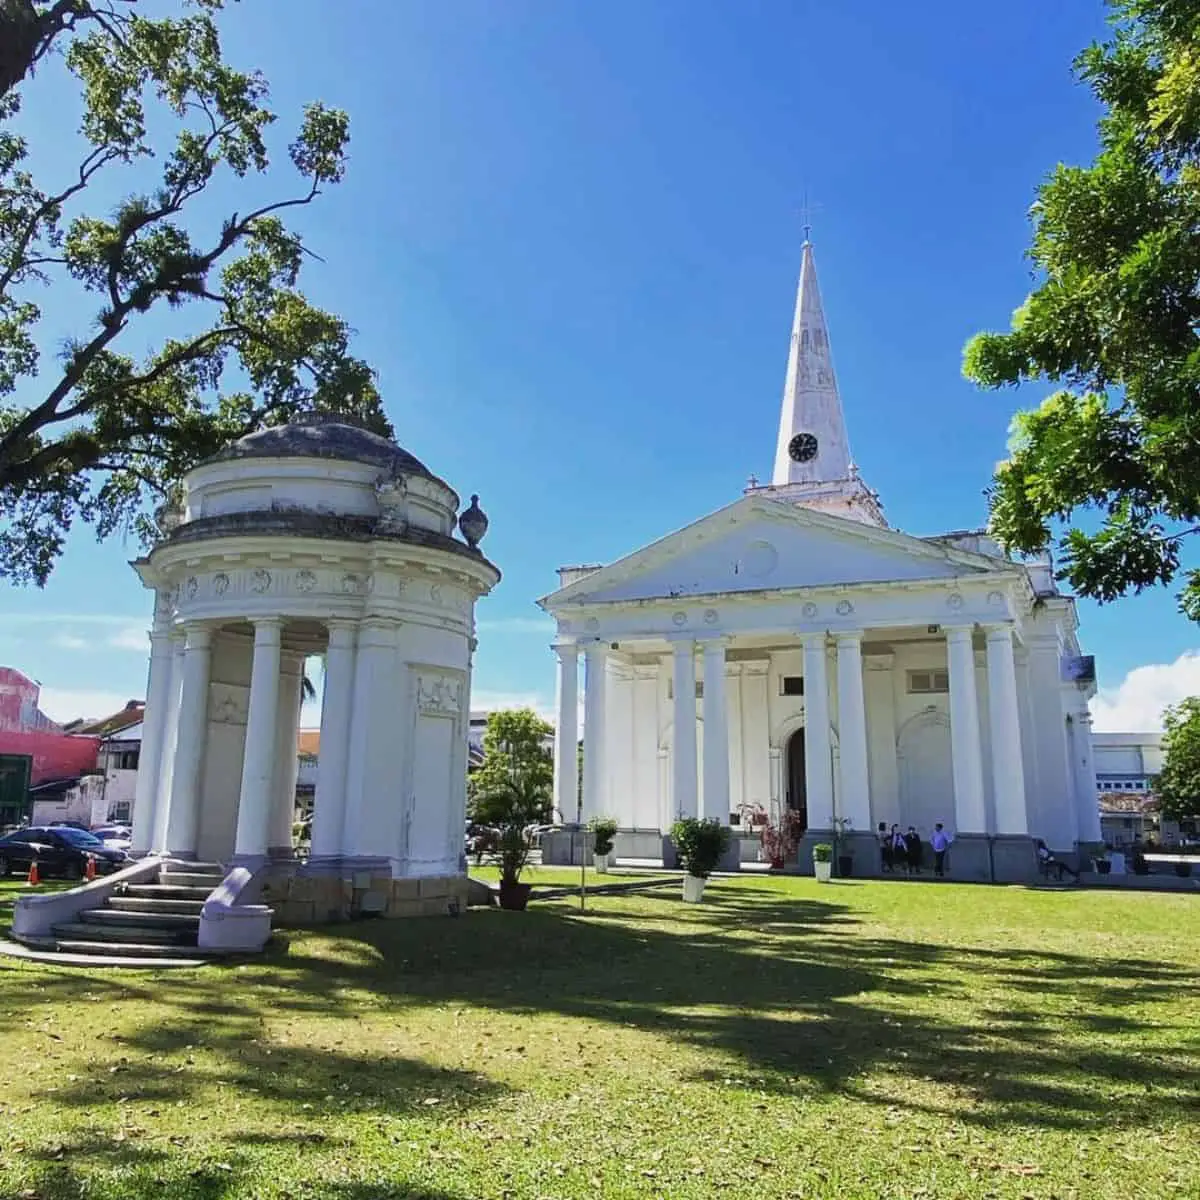 Penang’s world famous St. George Church on a bright morning